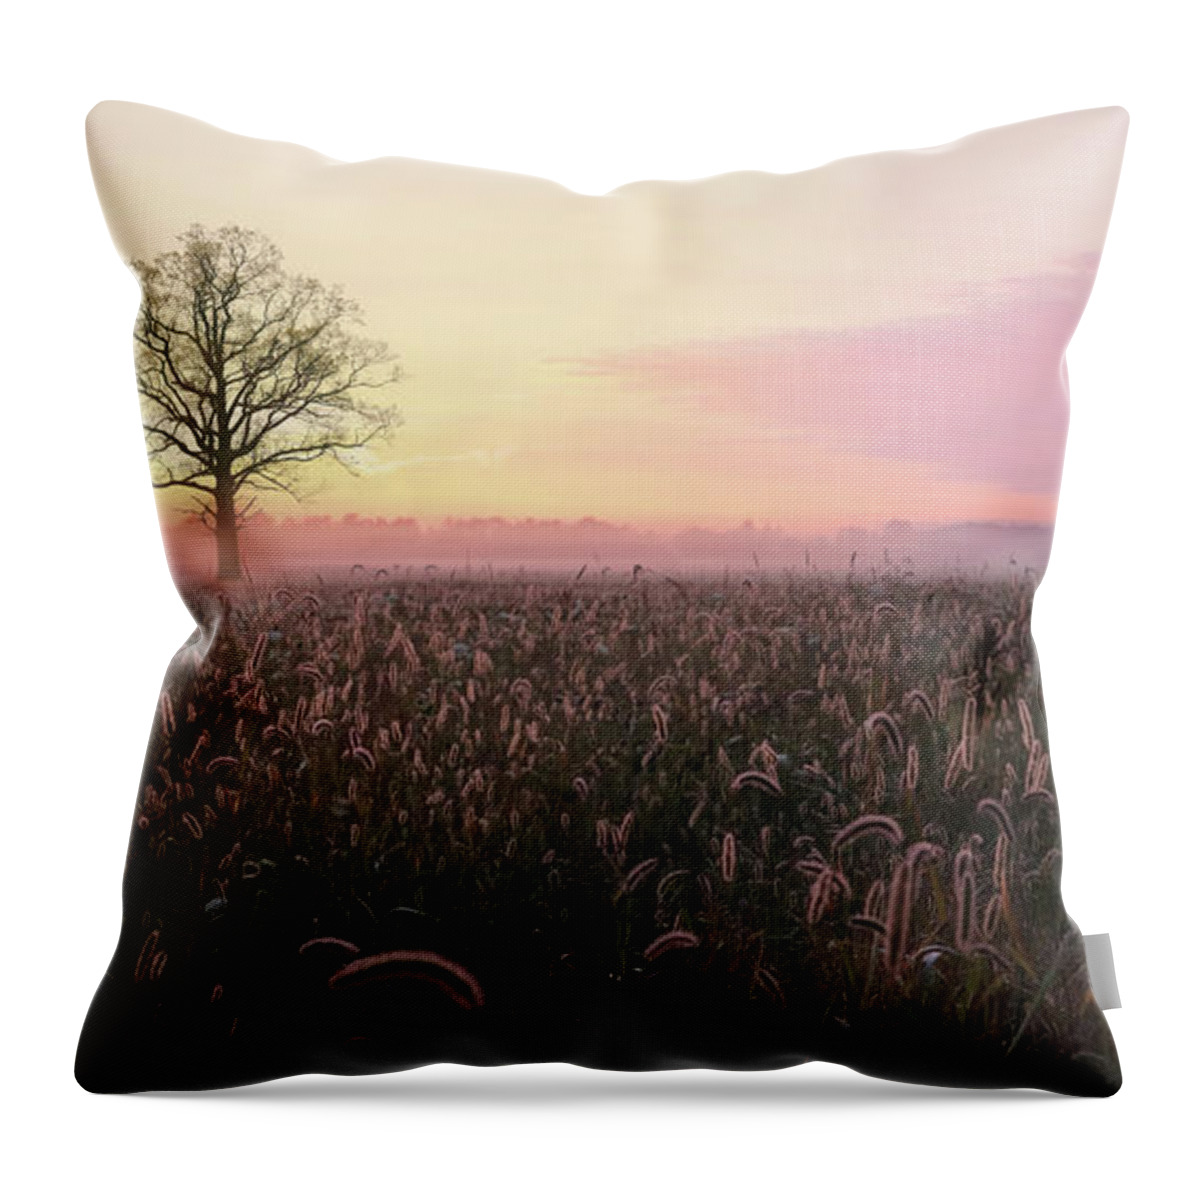 Sunrise Throw Pillow featuring the photograph Cherish the Simple Things by Lori Deiter